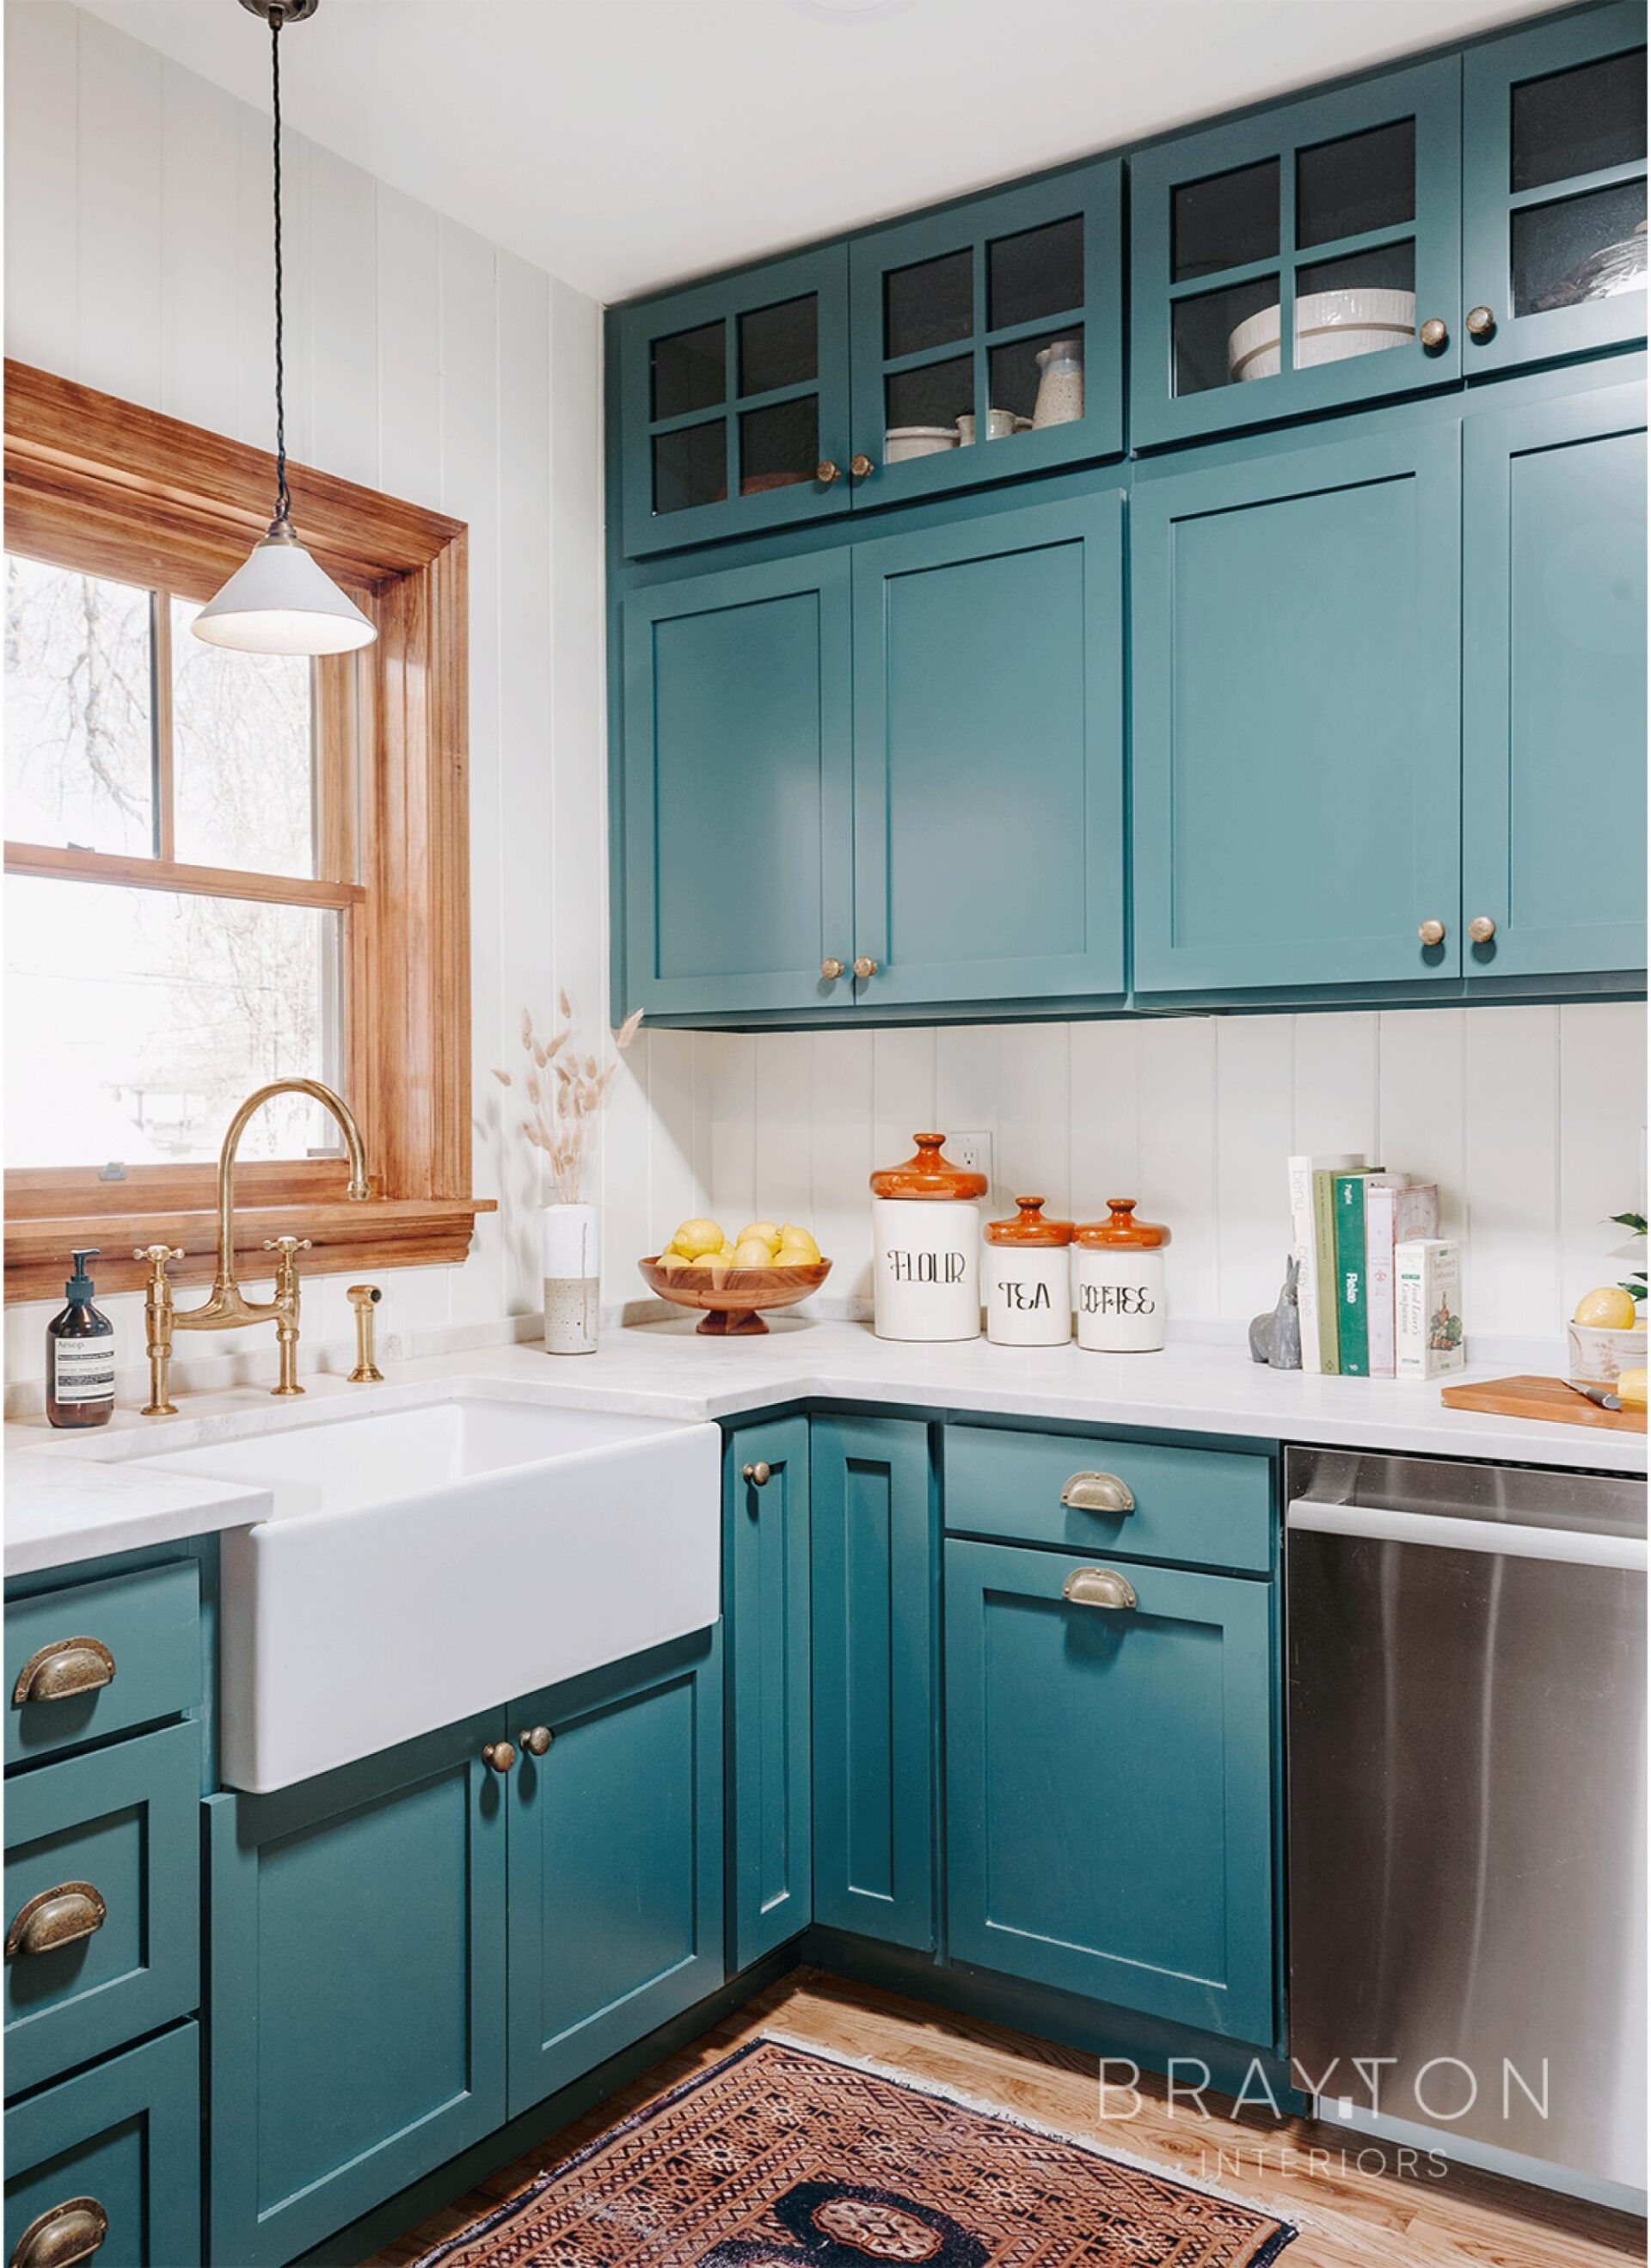 This historic Highlands townhome renovation features custom colored cabinetry, handmade brass hardware and plumbing fixtures, handmade ceramic pendant light and a custom wood framed window.